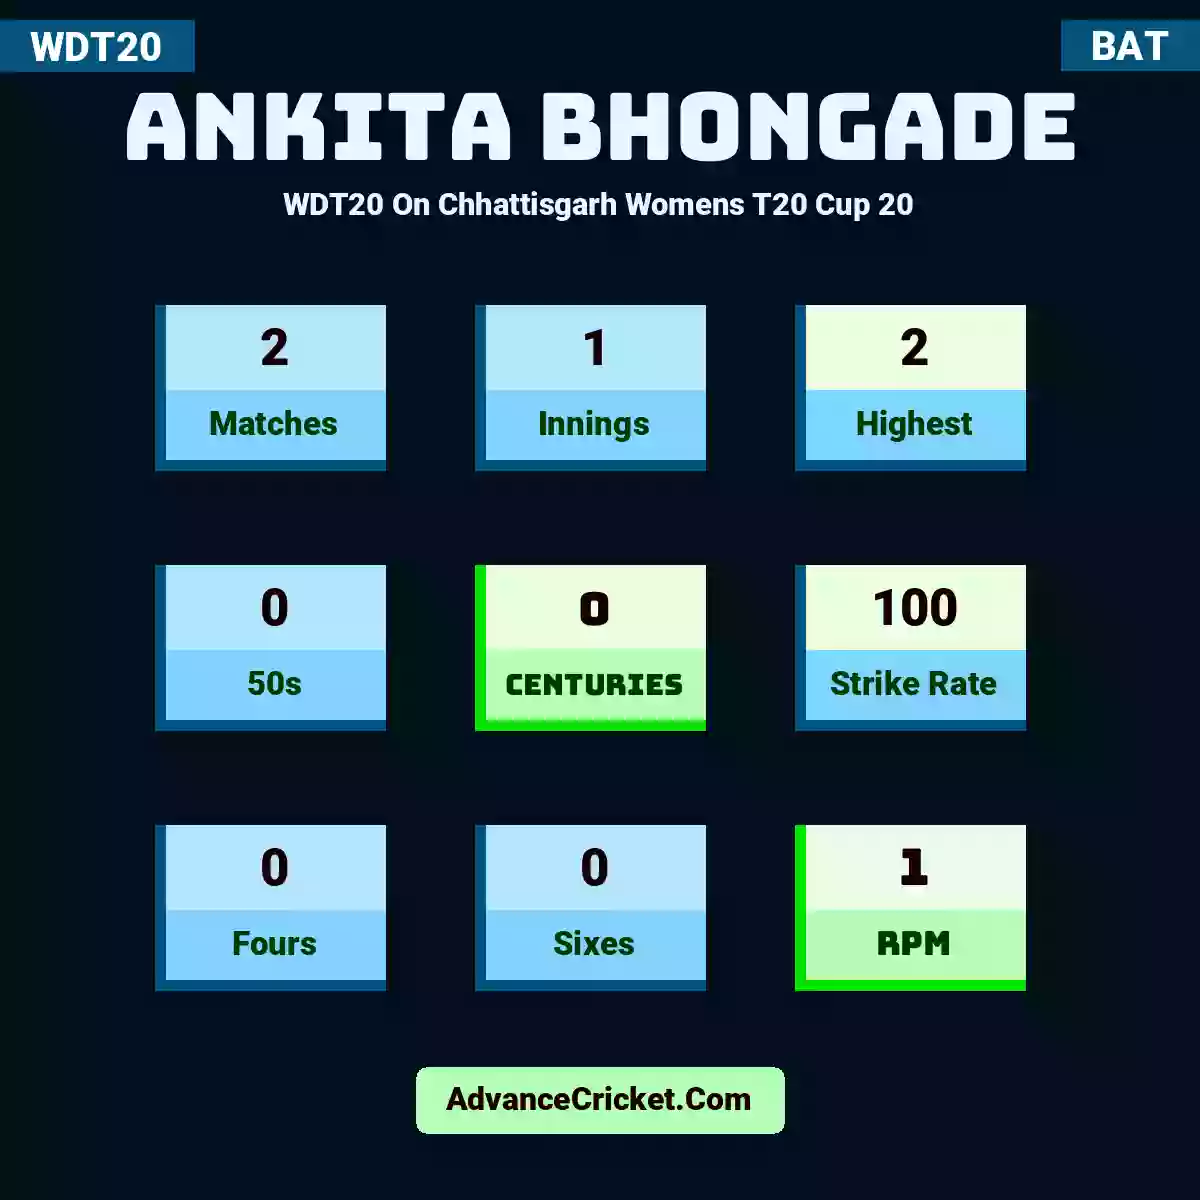 Ankita Bhongade WDT20  On Chhattisgarh Womens T20 Cup 20, Ankita Bhongade played 2 matches, scored 2 runs as highest, 0 half-centuries, and 0 centuries, with a strike rate of 100. A.Bhongade hit 0 fours and 0 sixes, with an RPM of 1.